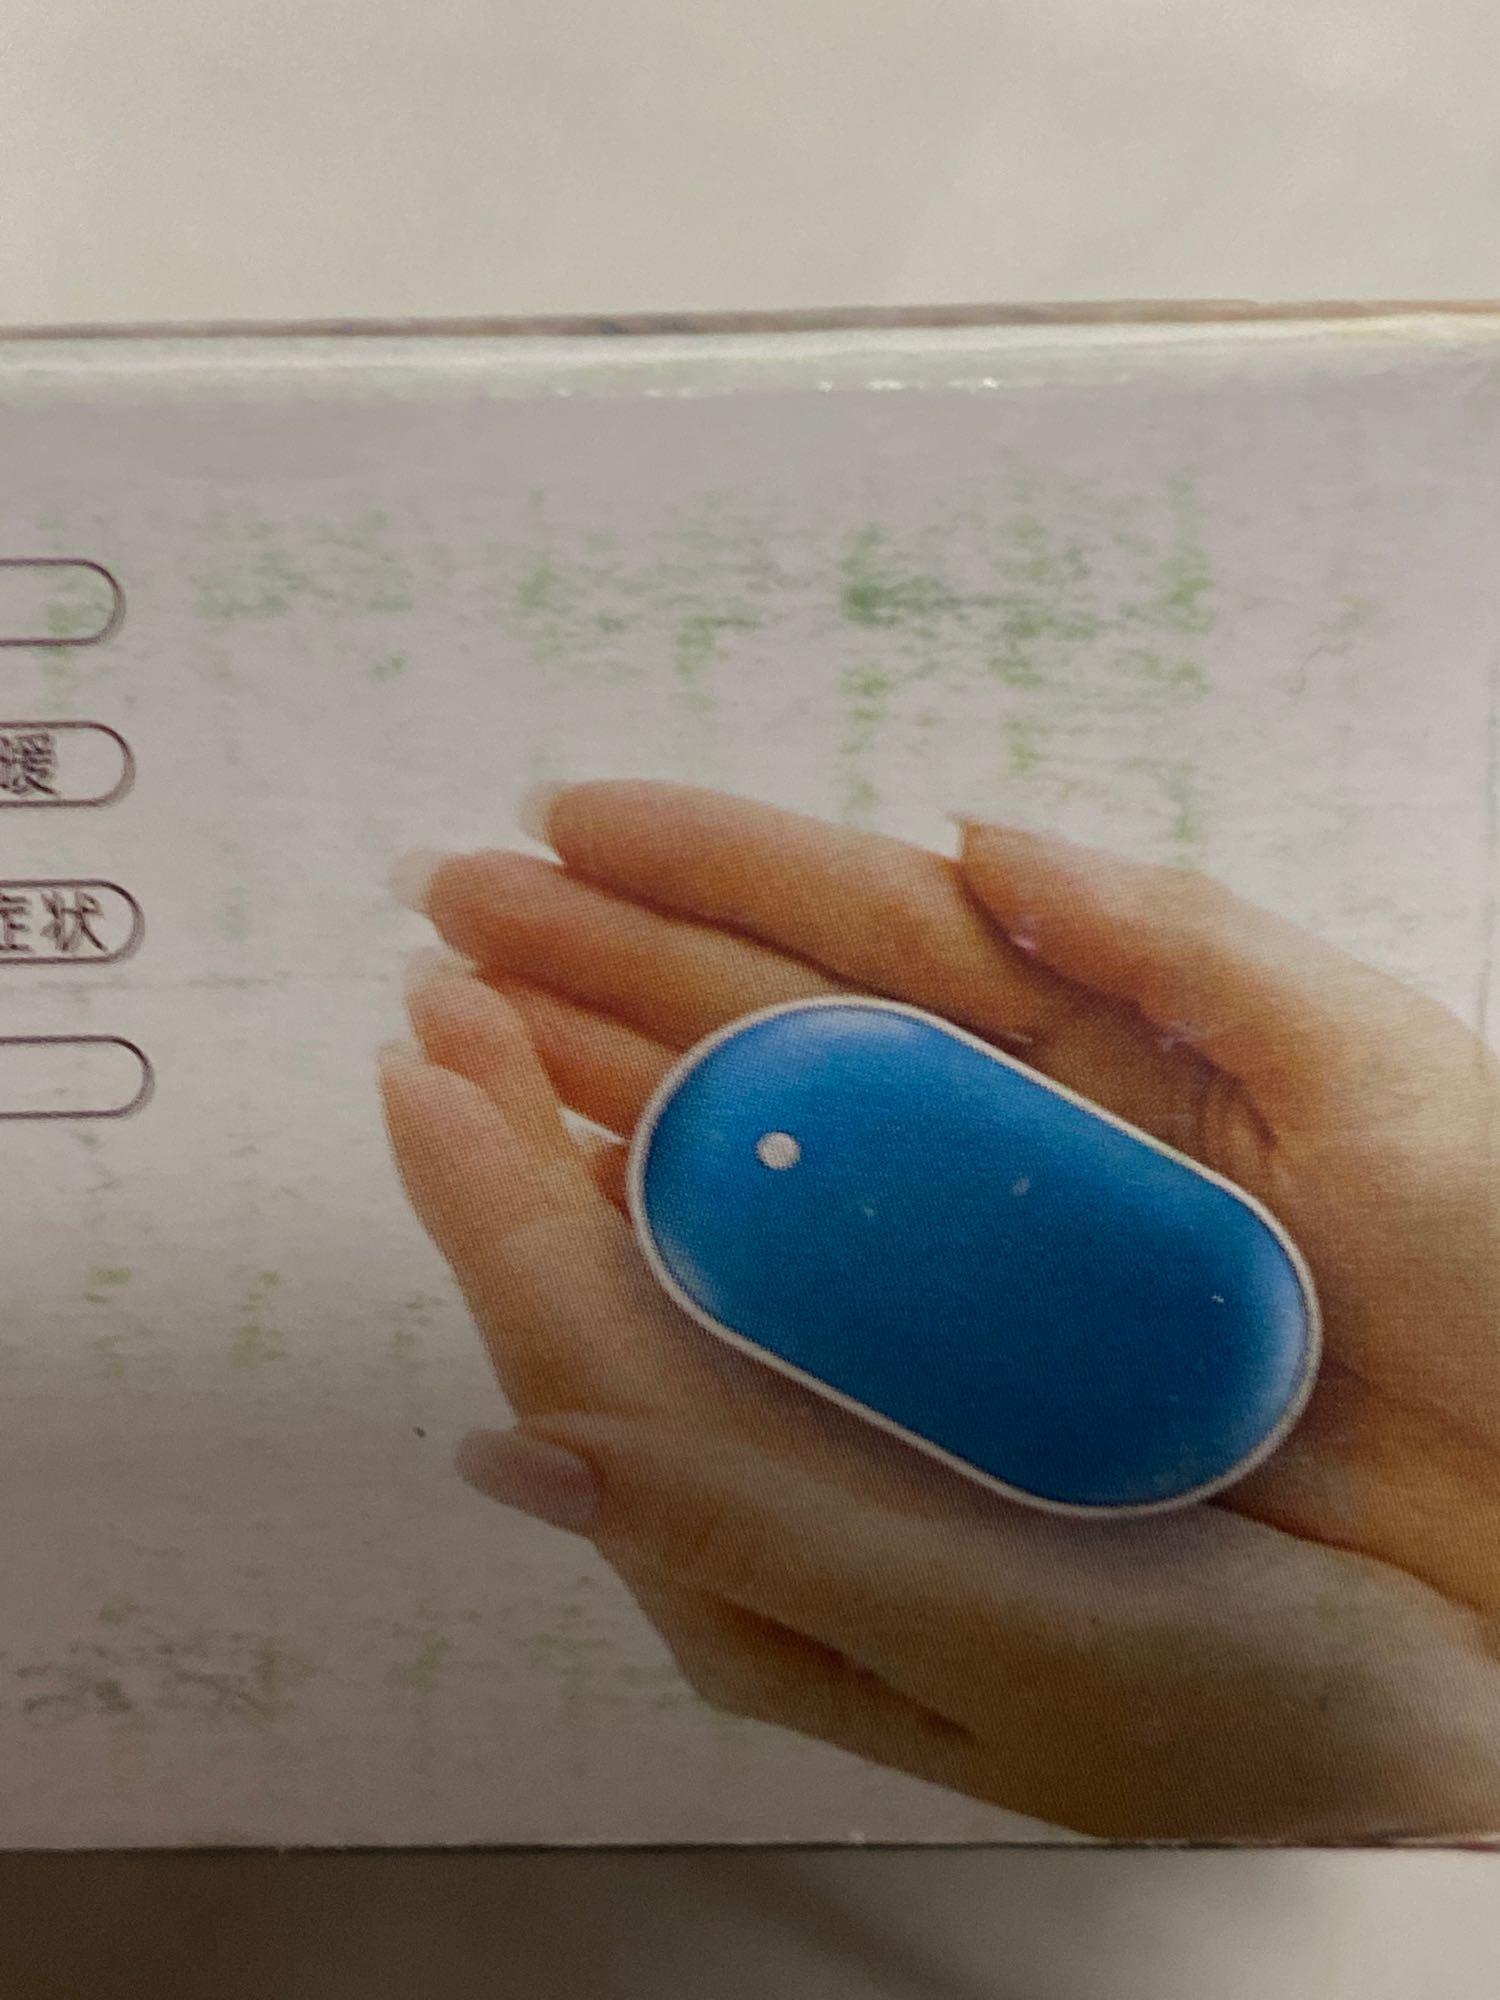 Reusable Pocket Mini Electric Hand Warmer and Portable Power Bank, $20.00 MSRP (BRAND NEW)